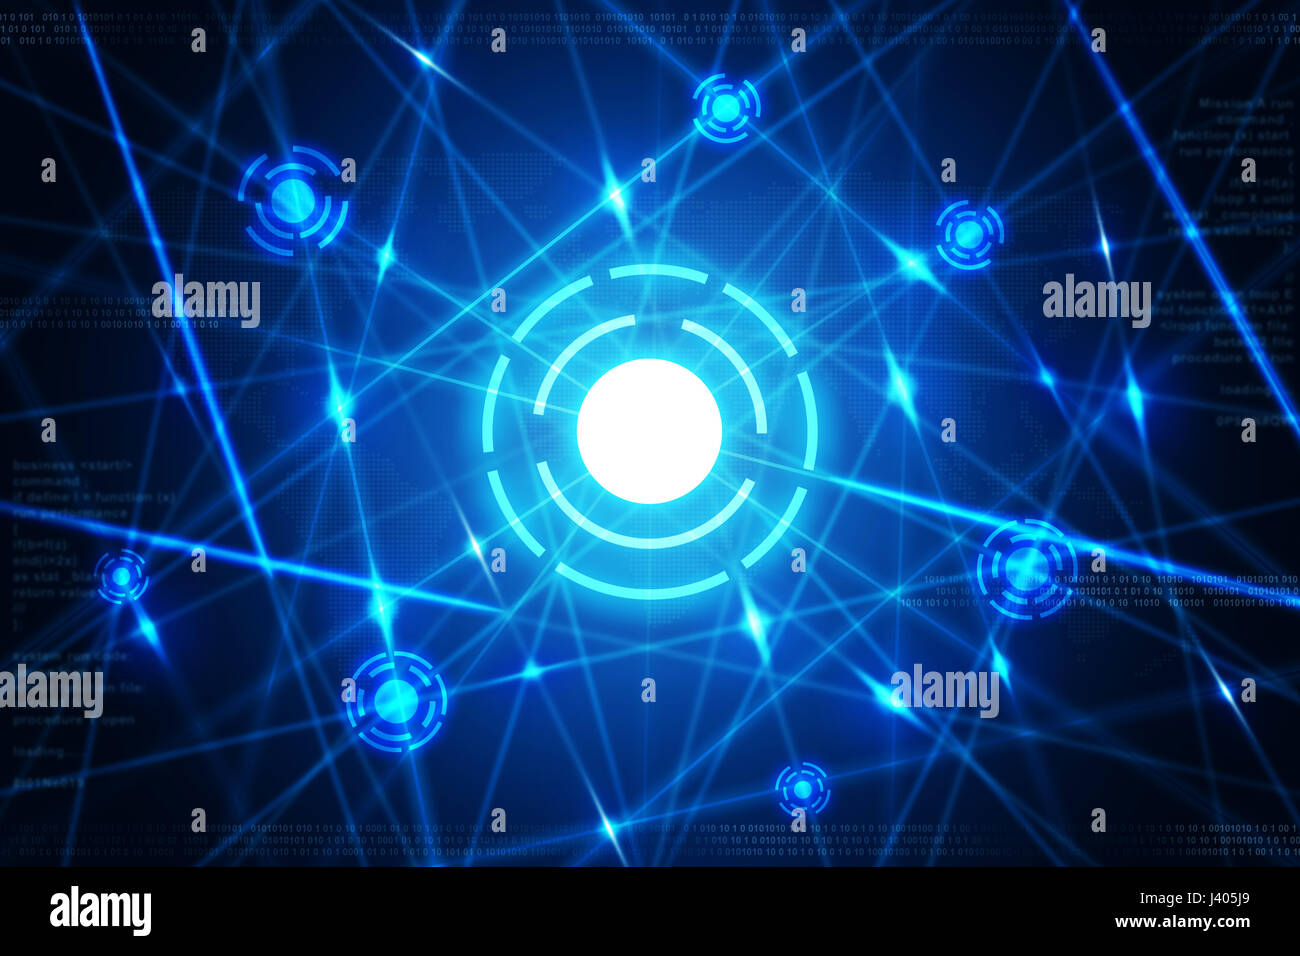 Blue abstract futuristic digital business networking technology background Banque D'Images